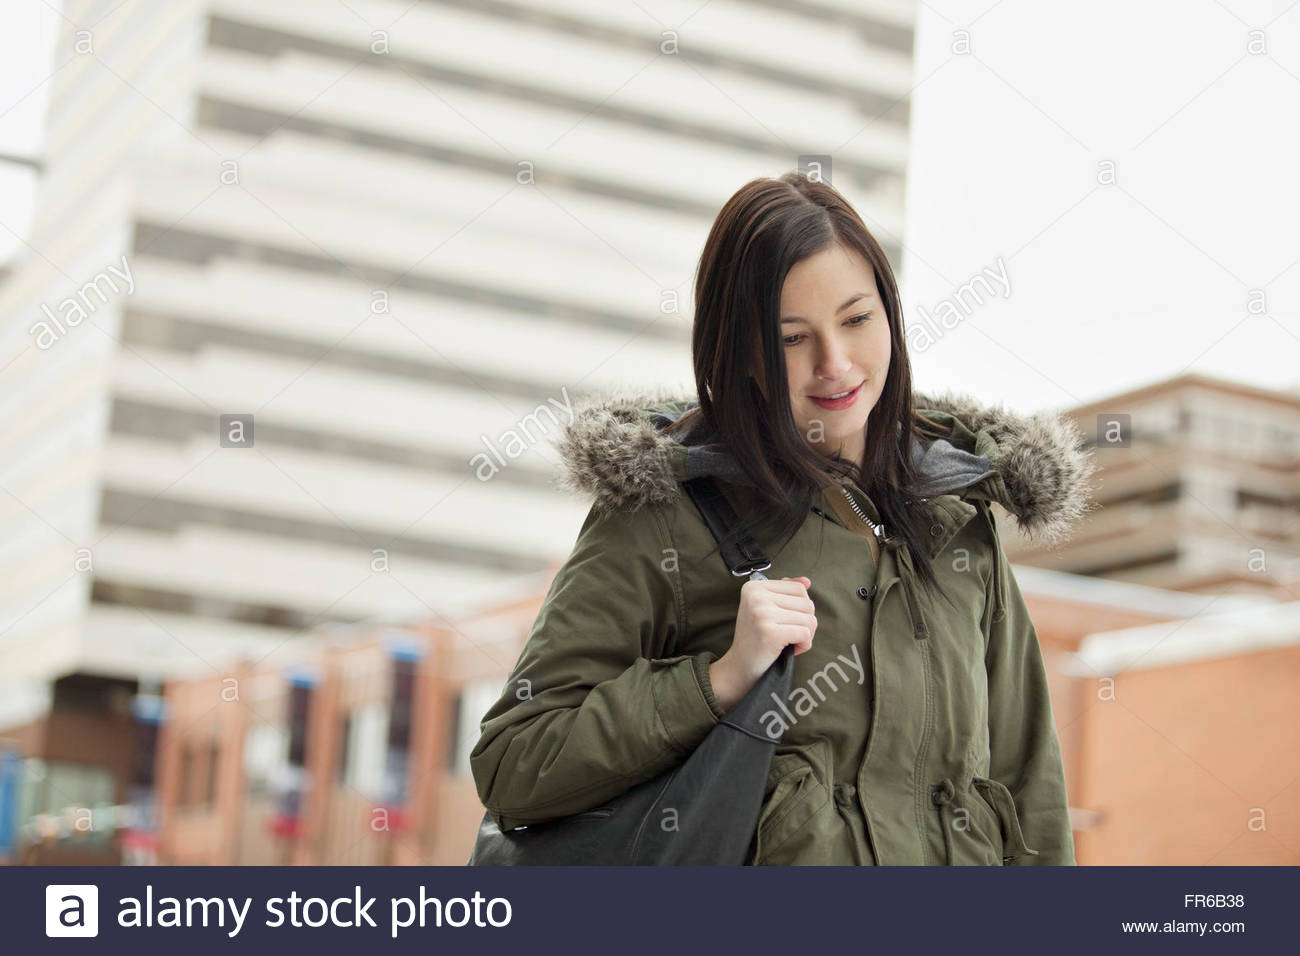 young woman out for a brisk walk Stock Photo